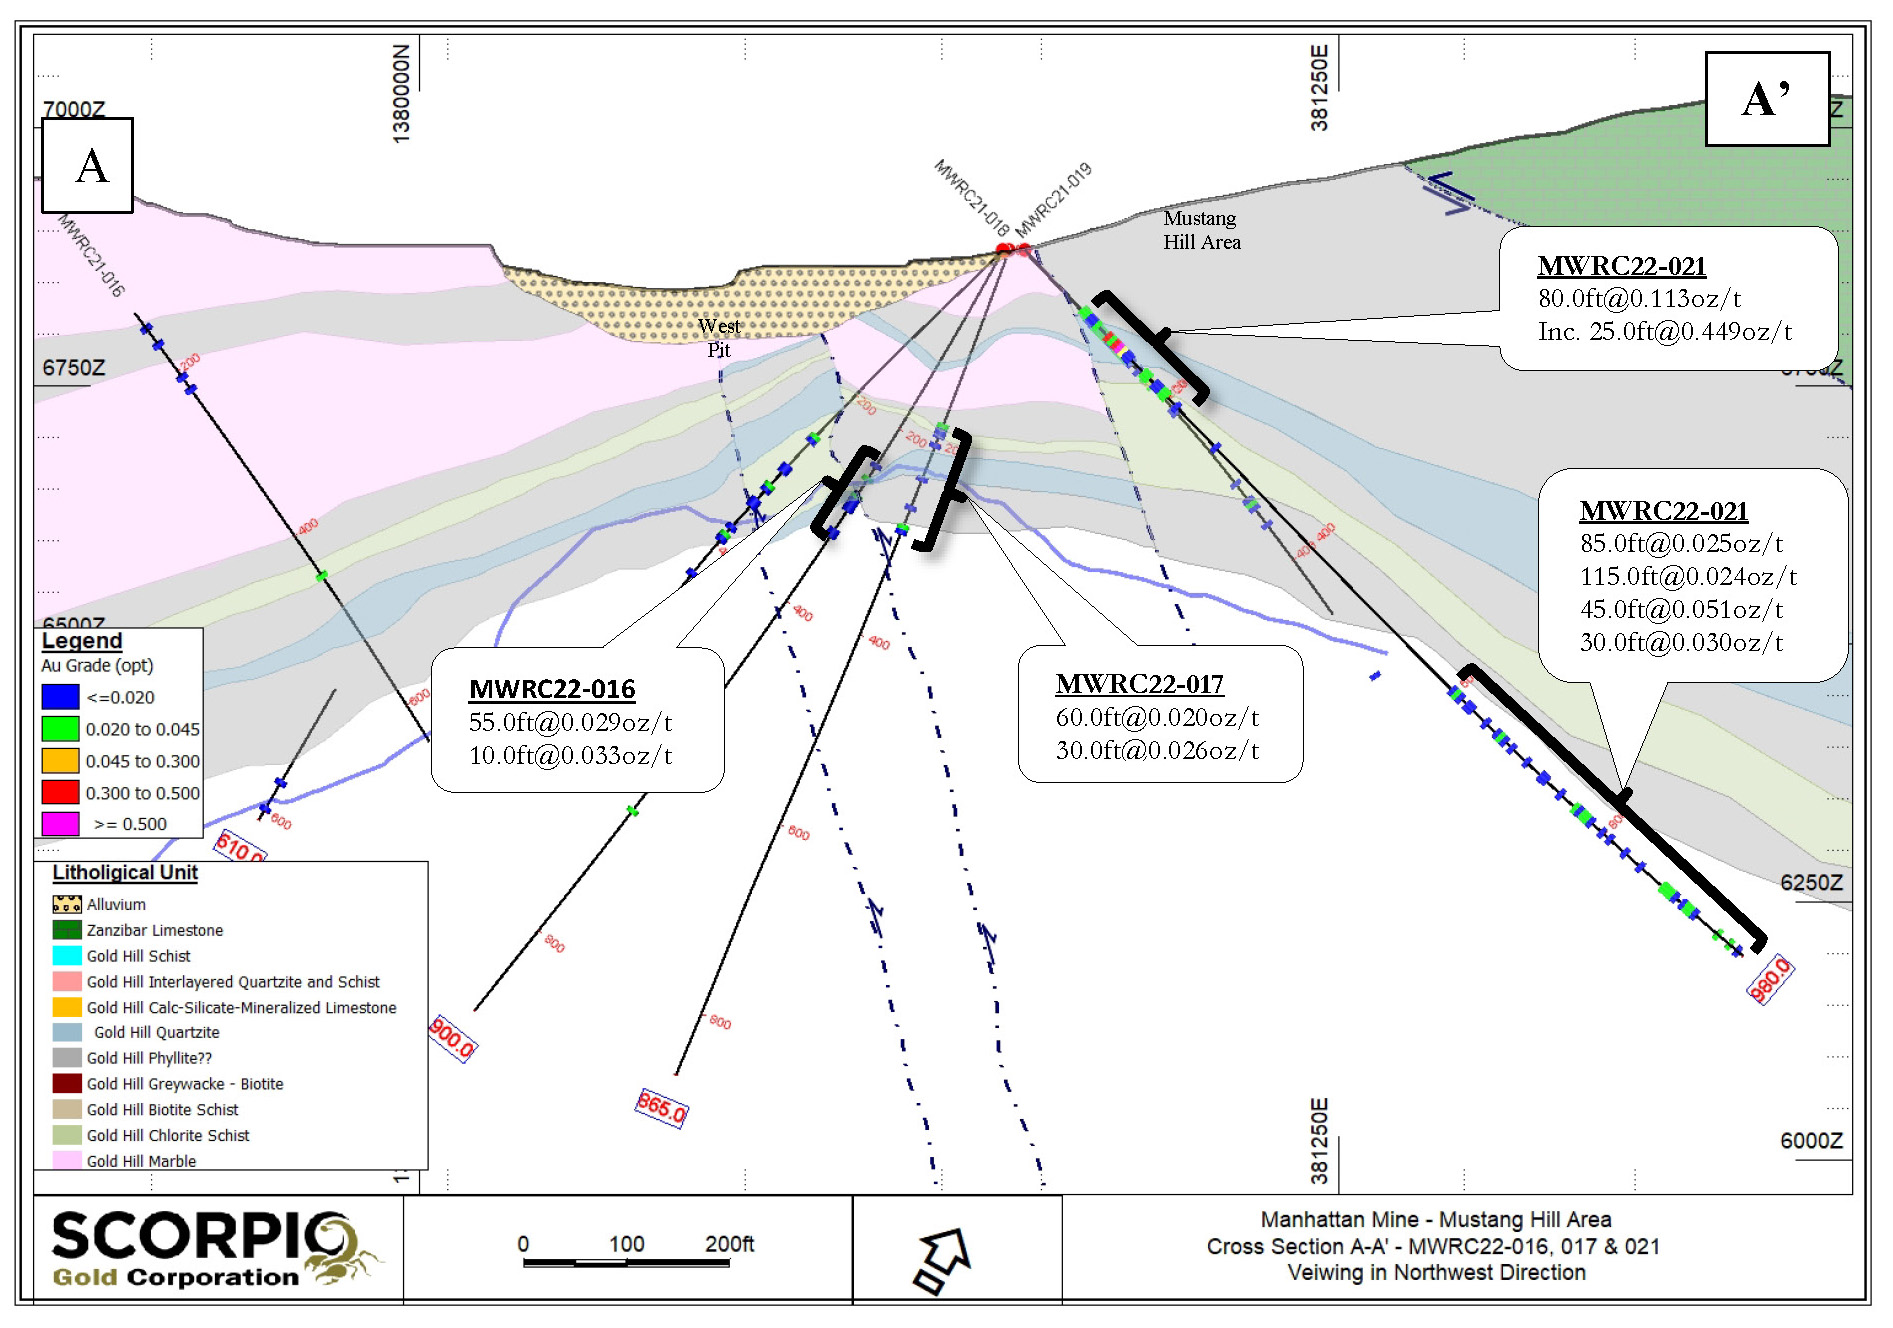 Cross section A-A’ viewing in the NW direction through MWRC22-016, 017 and 021 drill holes.